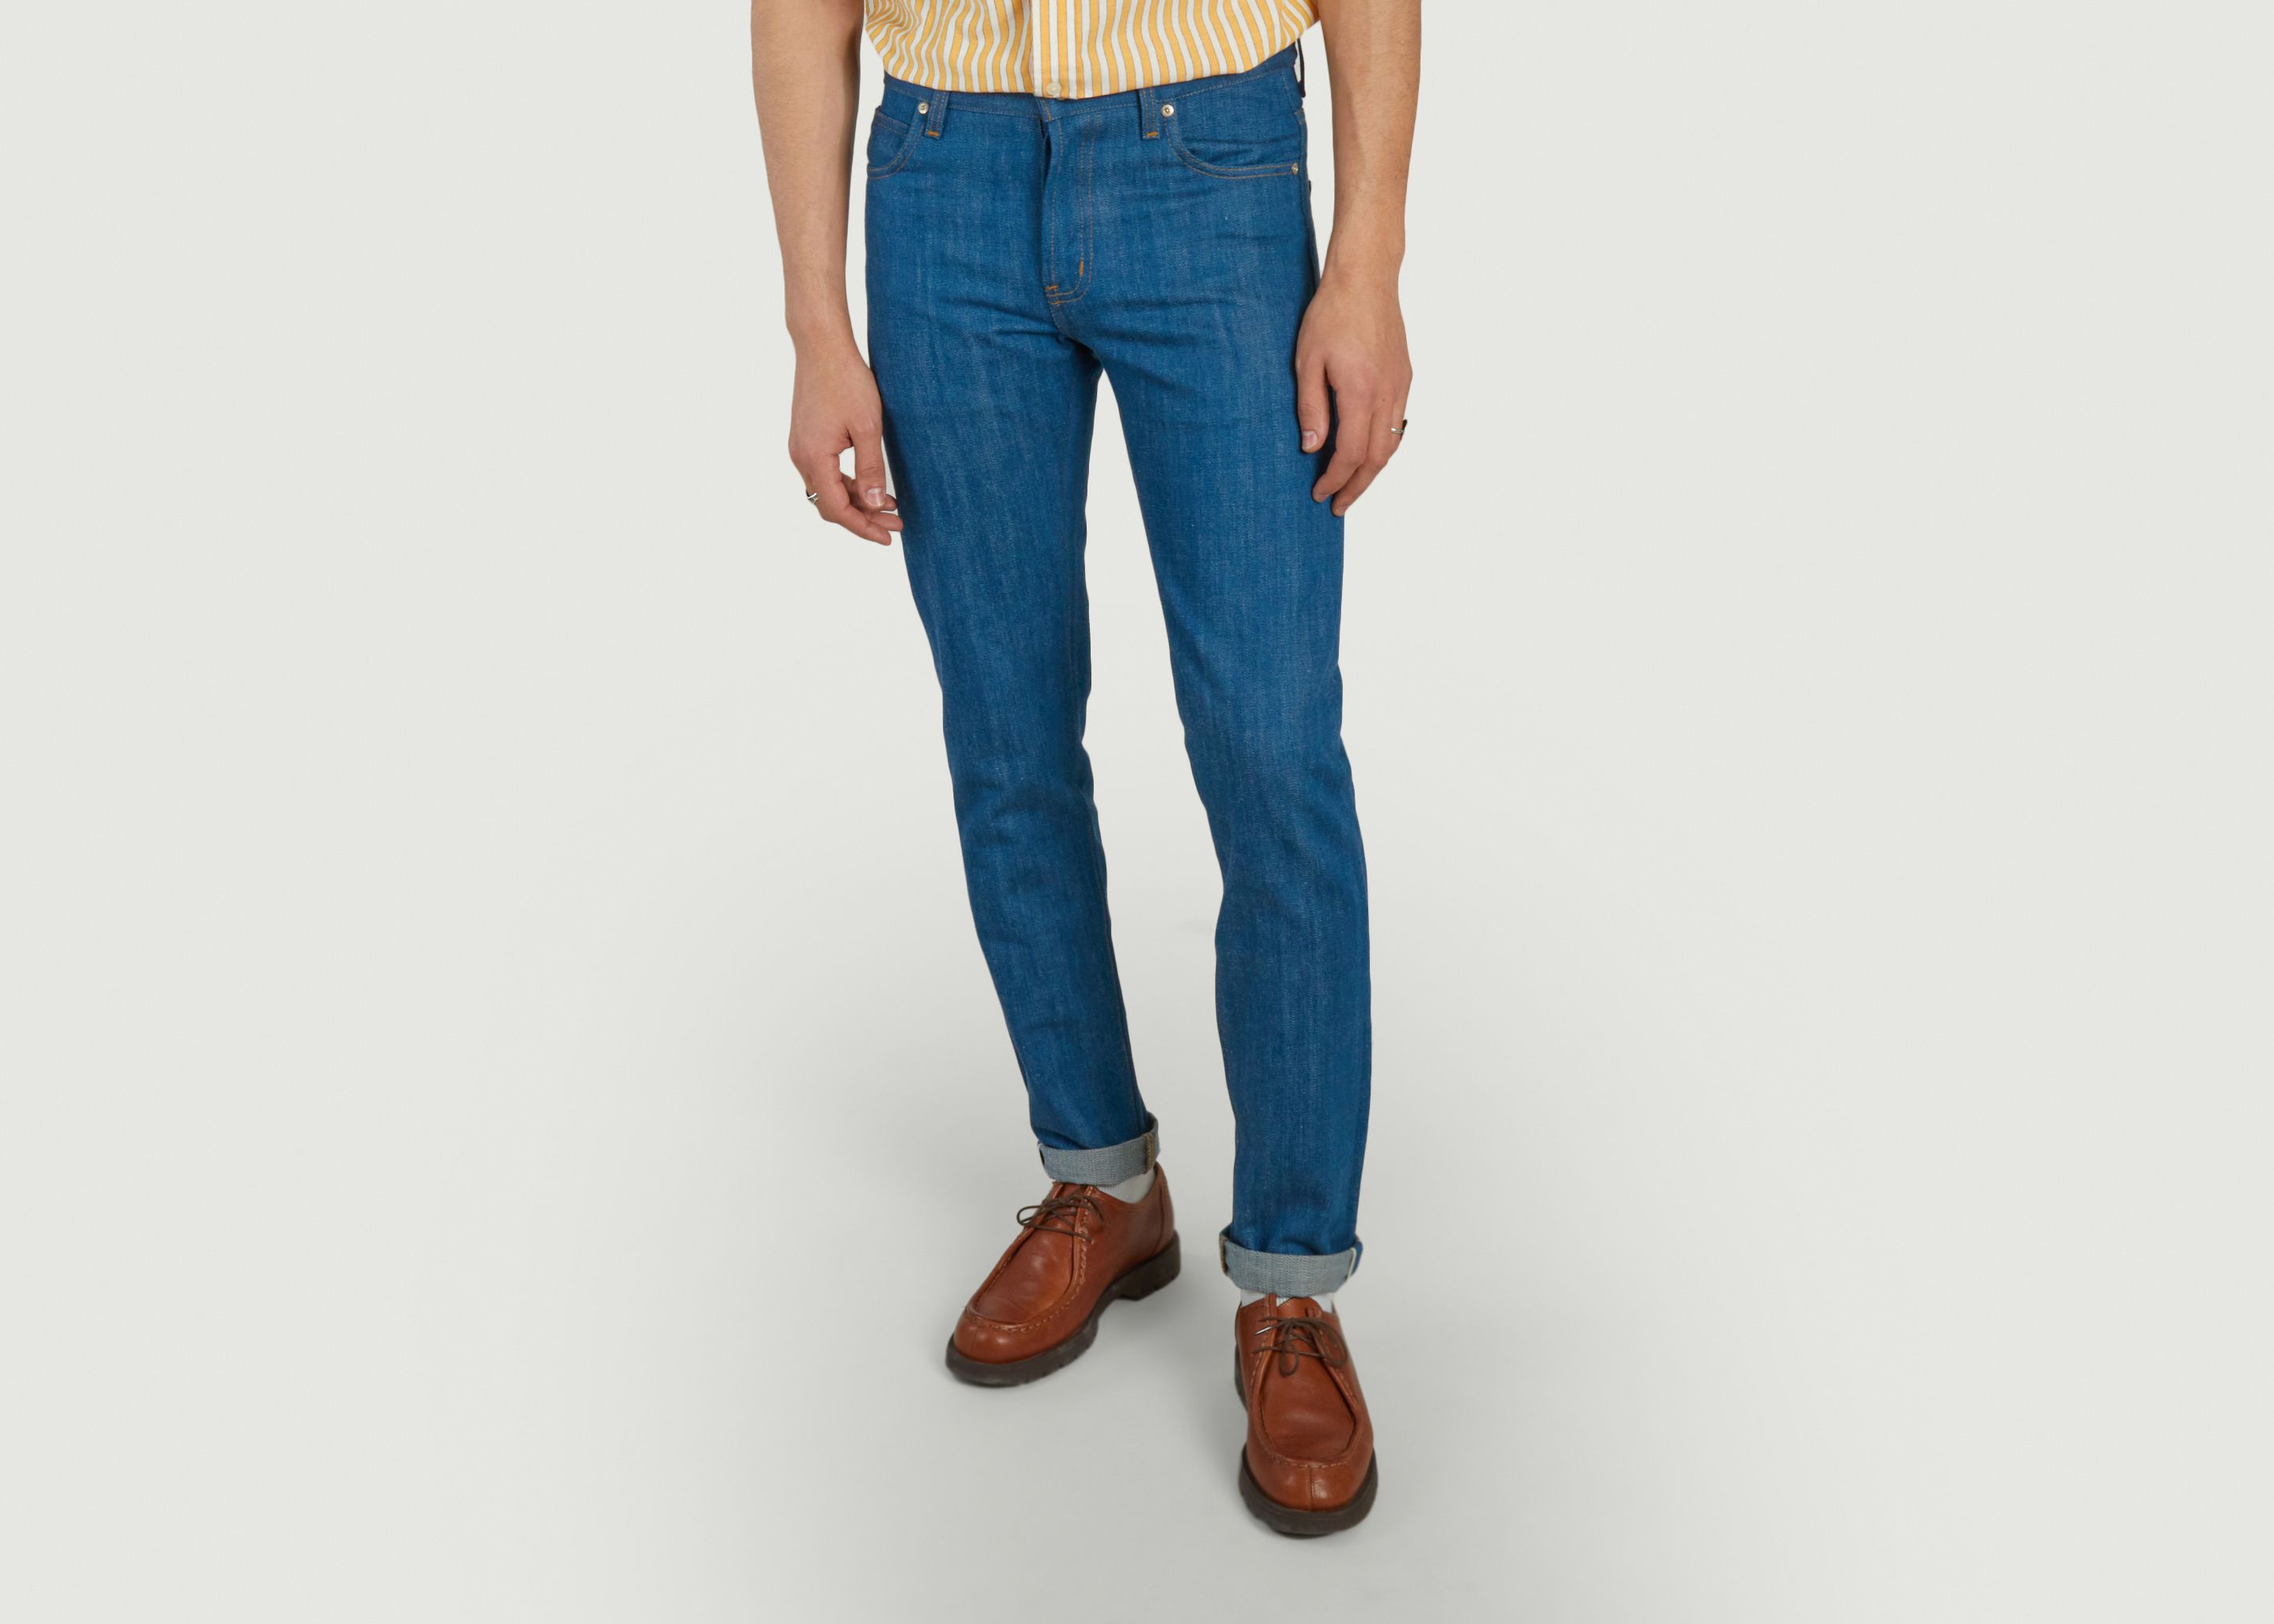 Super Guy Oceans Edge Selvedge Jeans - Naked and Famous